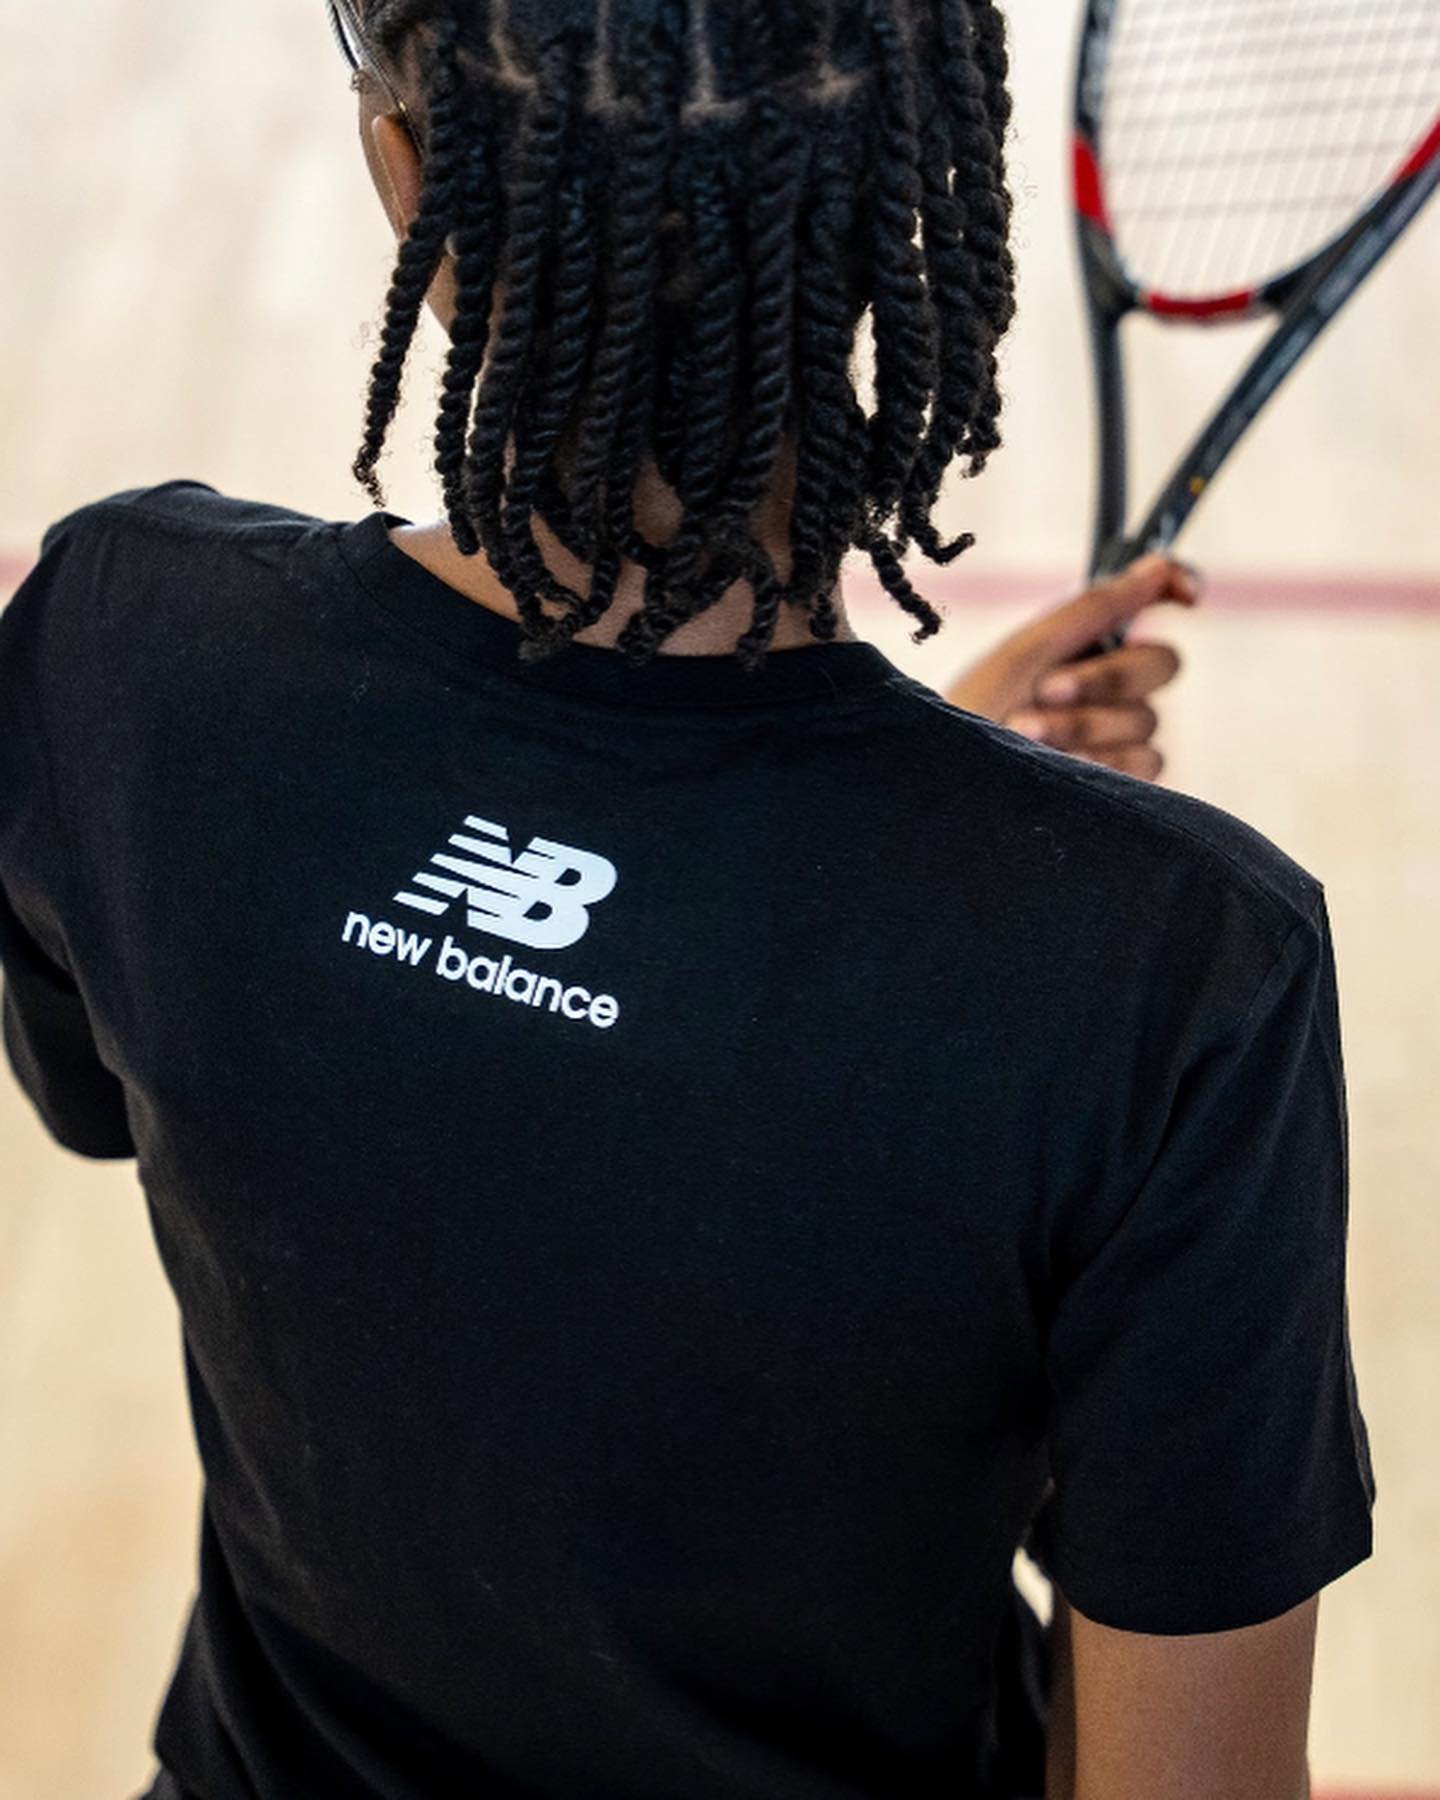 Ready to smash it on the squash courts in style 💪 😉

Thank you again to our sponsors @newbalance for these T shirts. Something tells me this is what winners wear&hellip;. #squashtraining #squash @nbgivesback